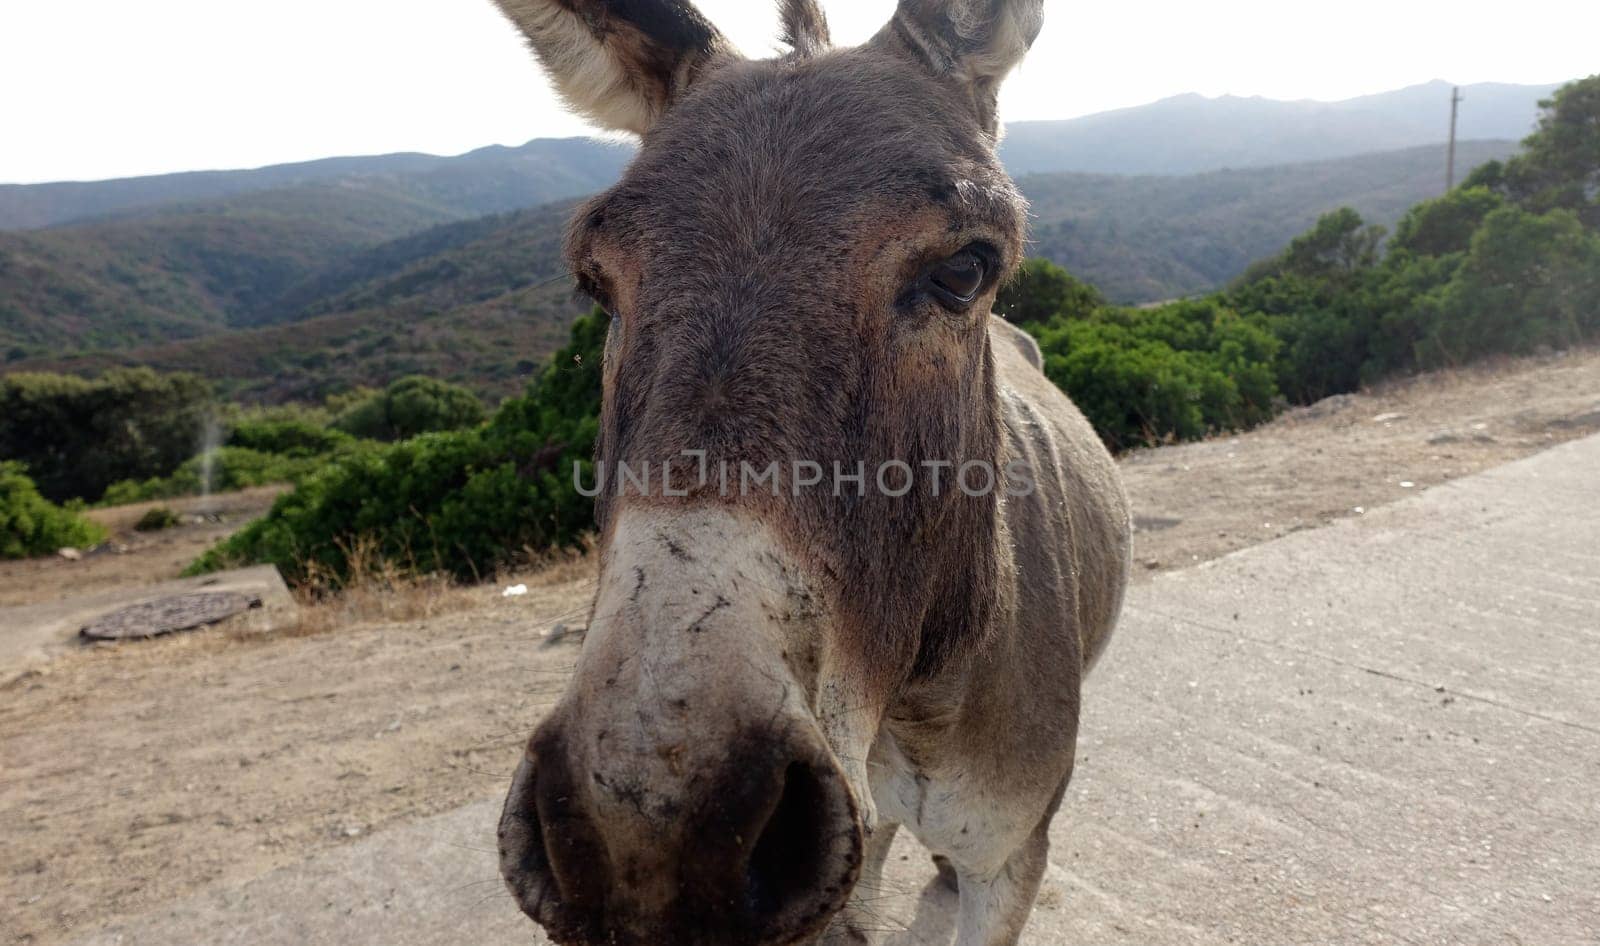 A wild donkey wanders the streets of the village. by Jamaladeen